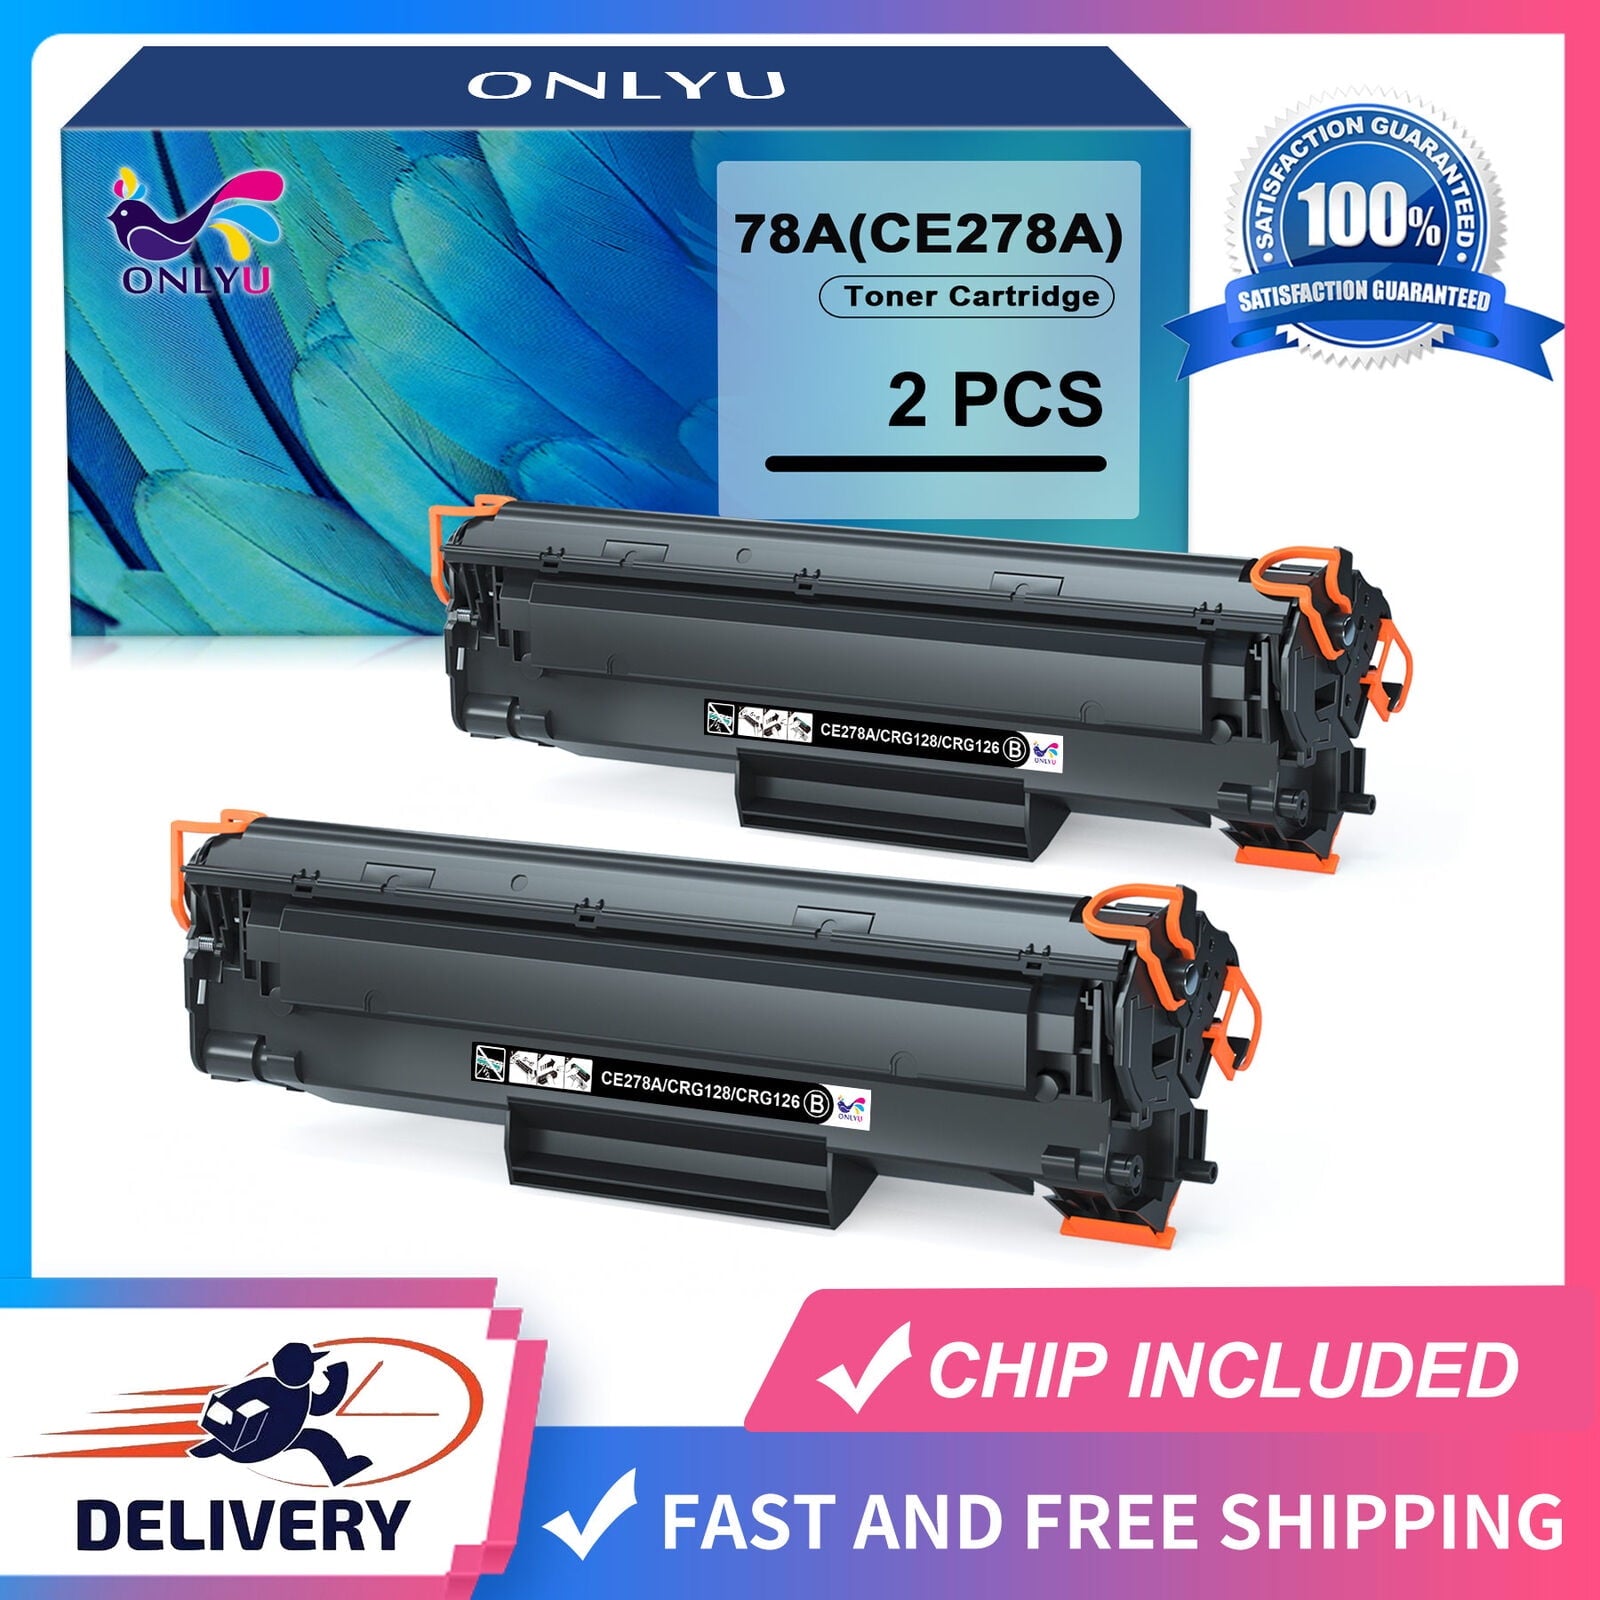 ONLYU 78A Toner Cartridges High Yield Replacement for HP 2 Black